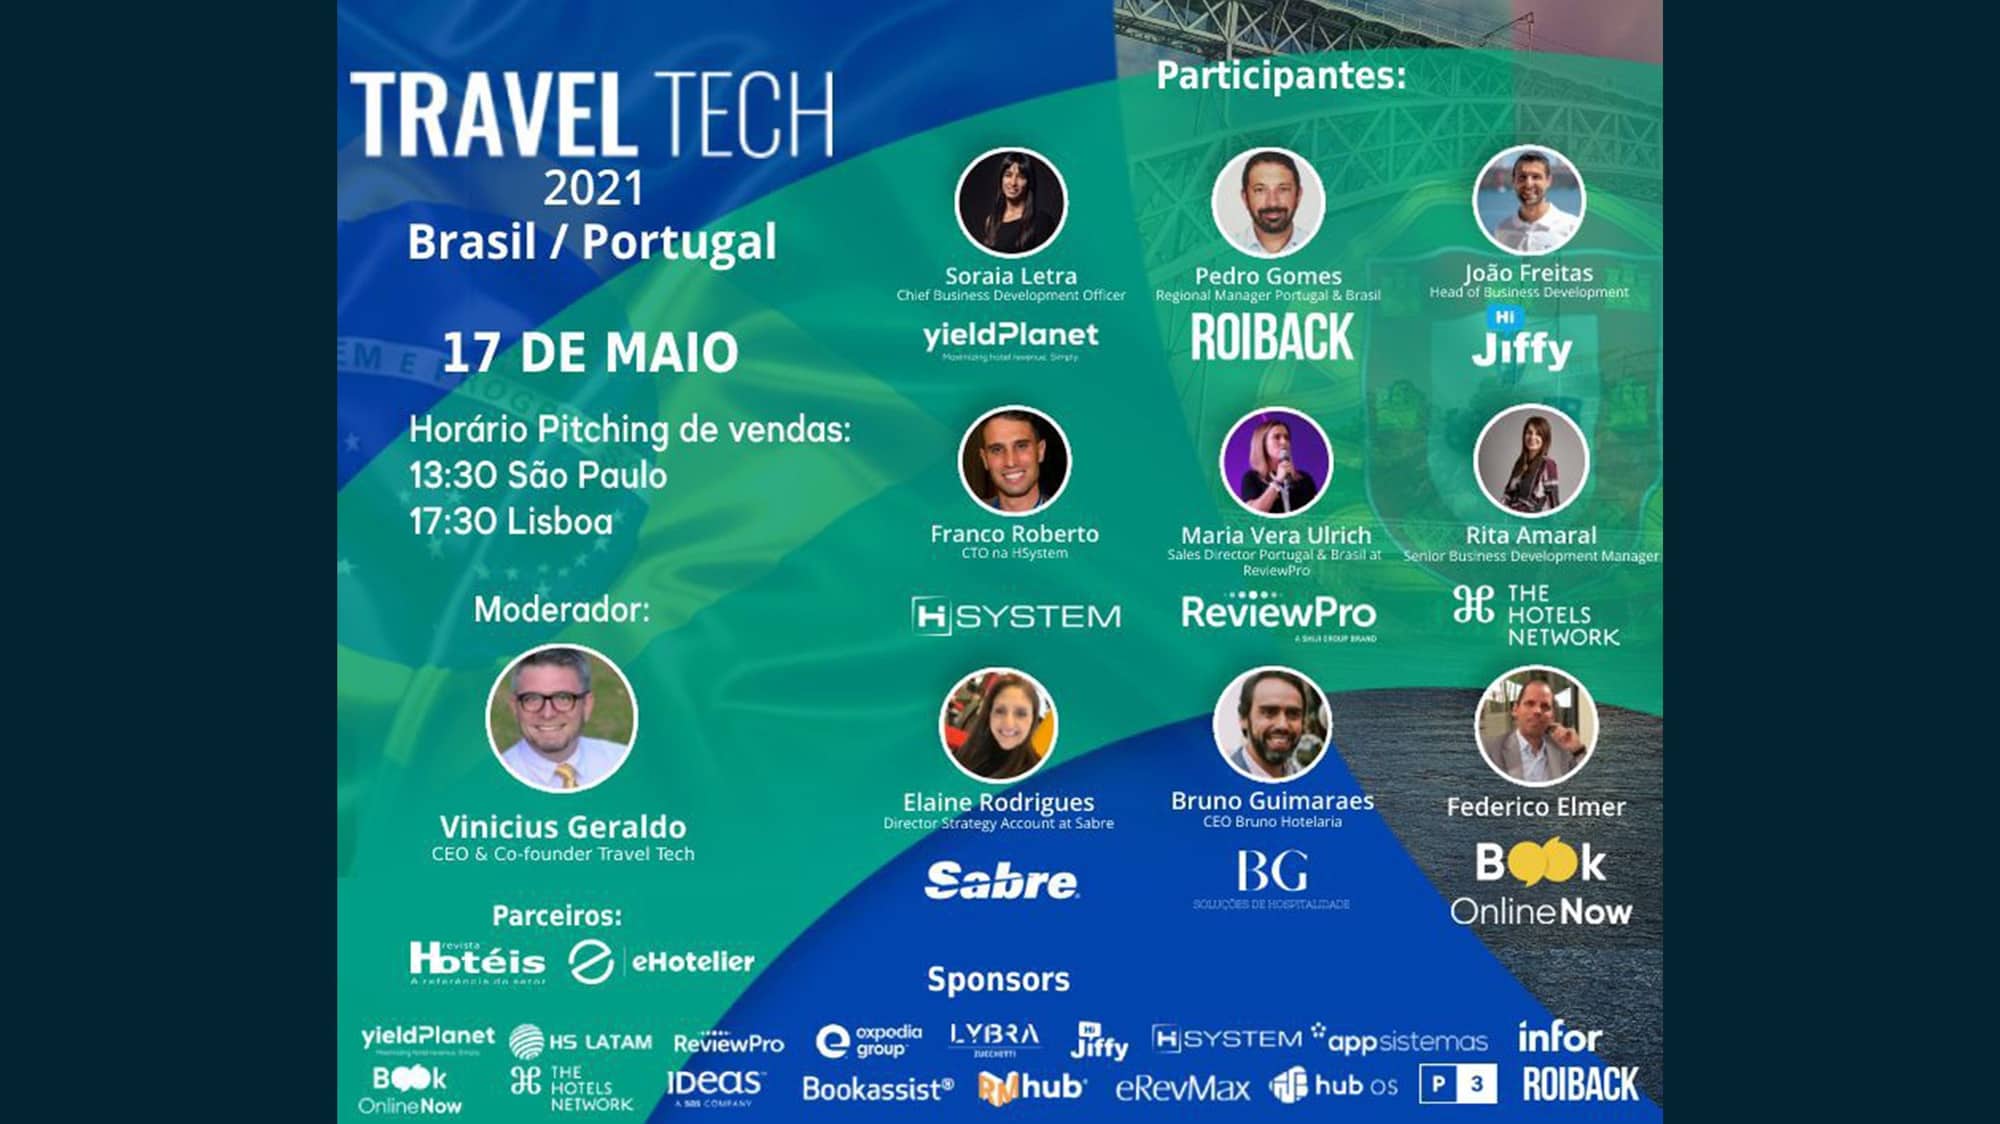 Hijiffy joins the conversation of travel tech brazil & portugal edition